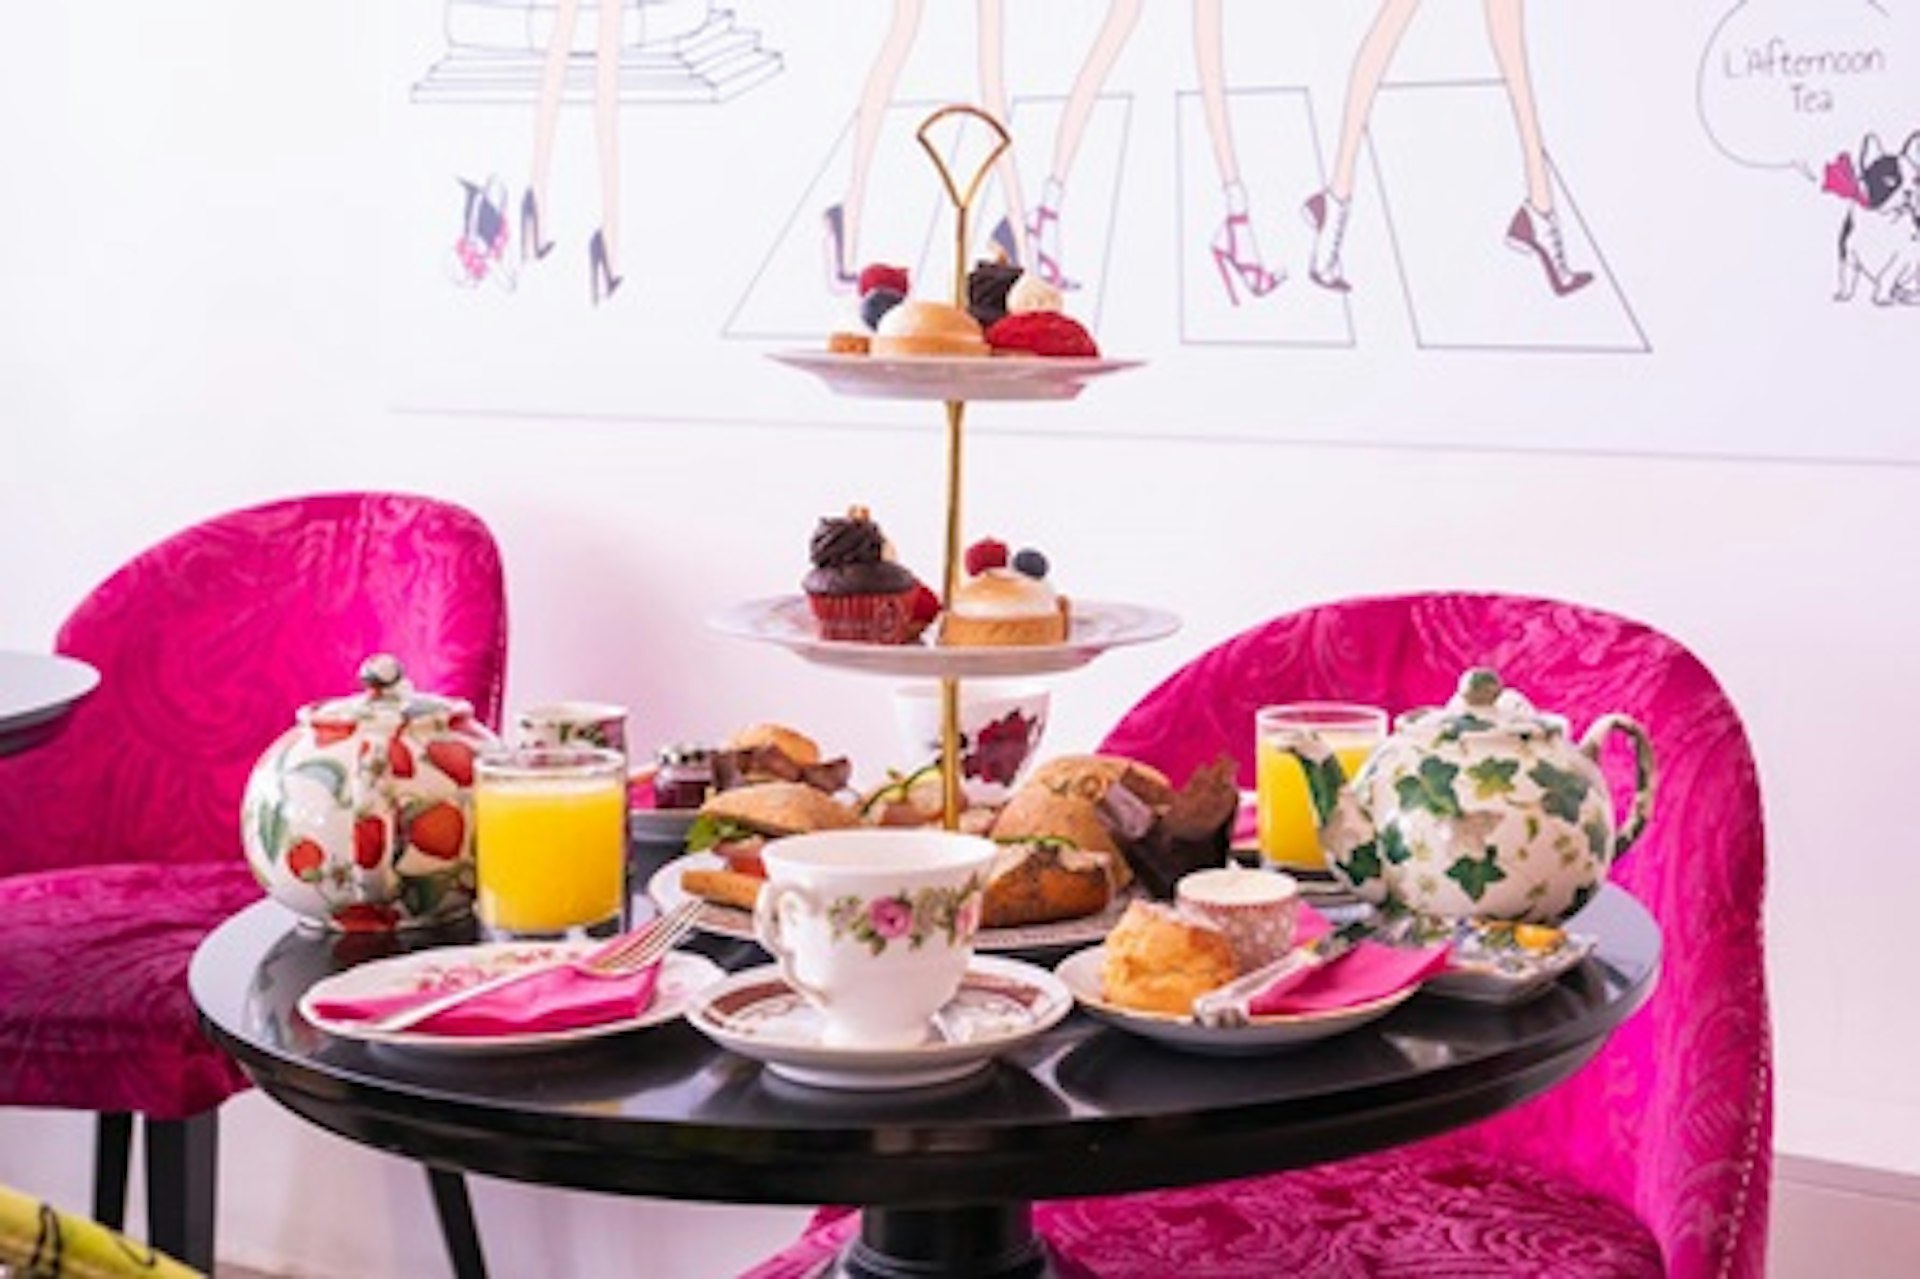 Bottomless Prosecco Afternoon Tea for Two at Brigit's Bakery Covent Garden 2